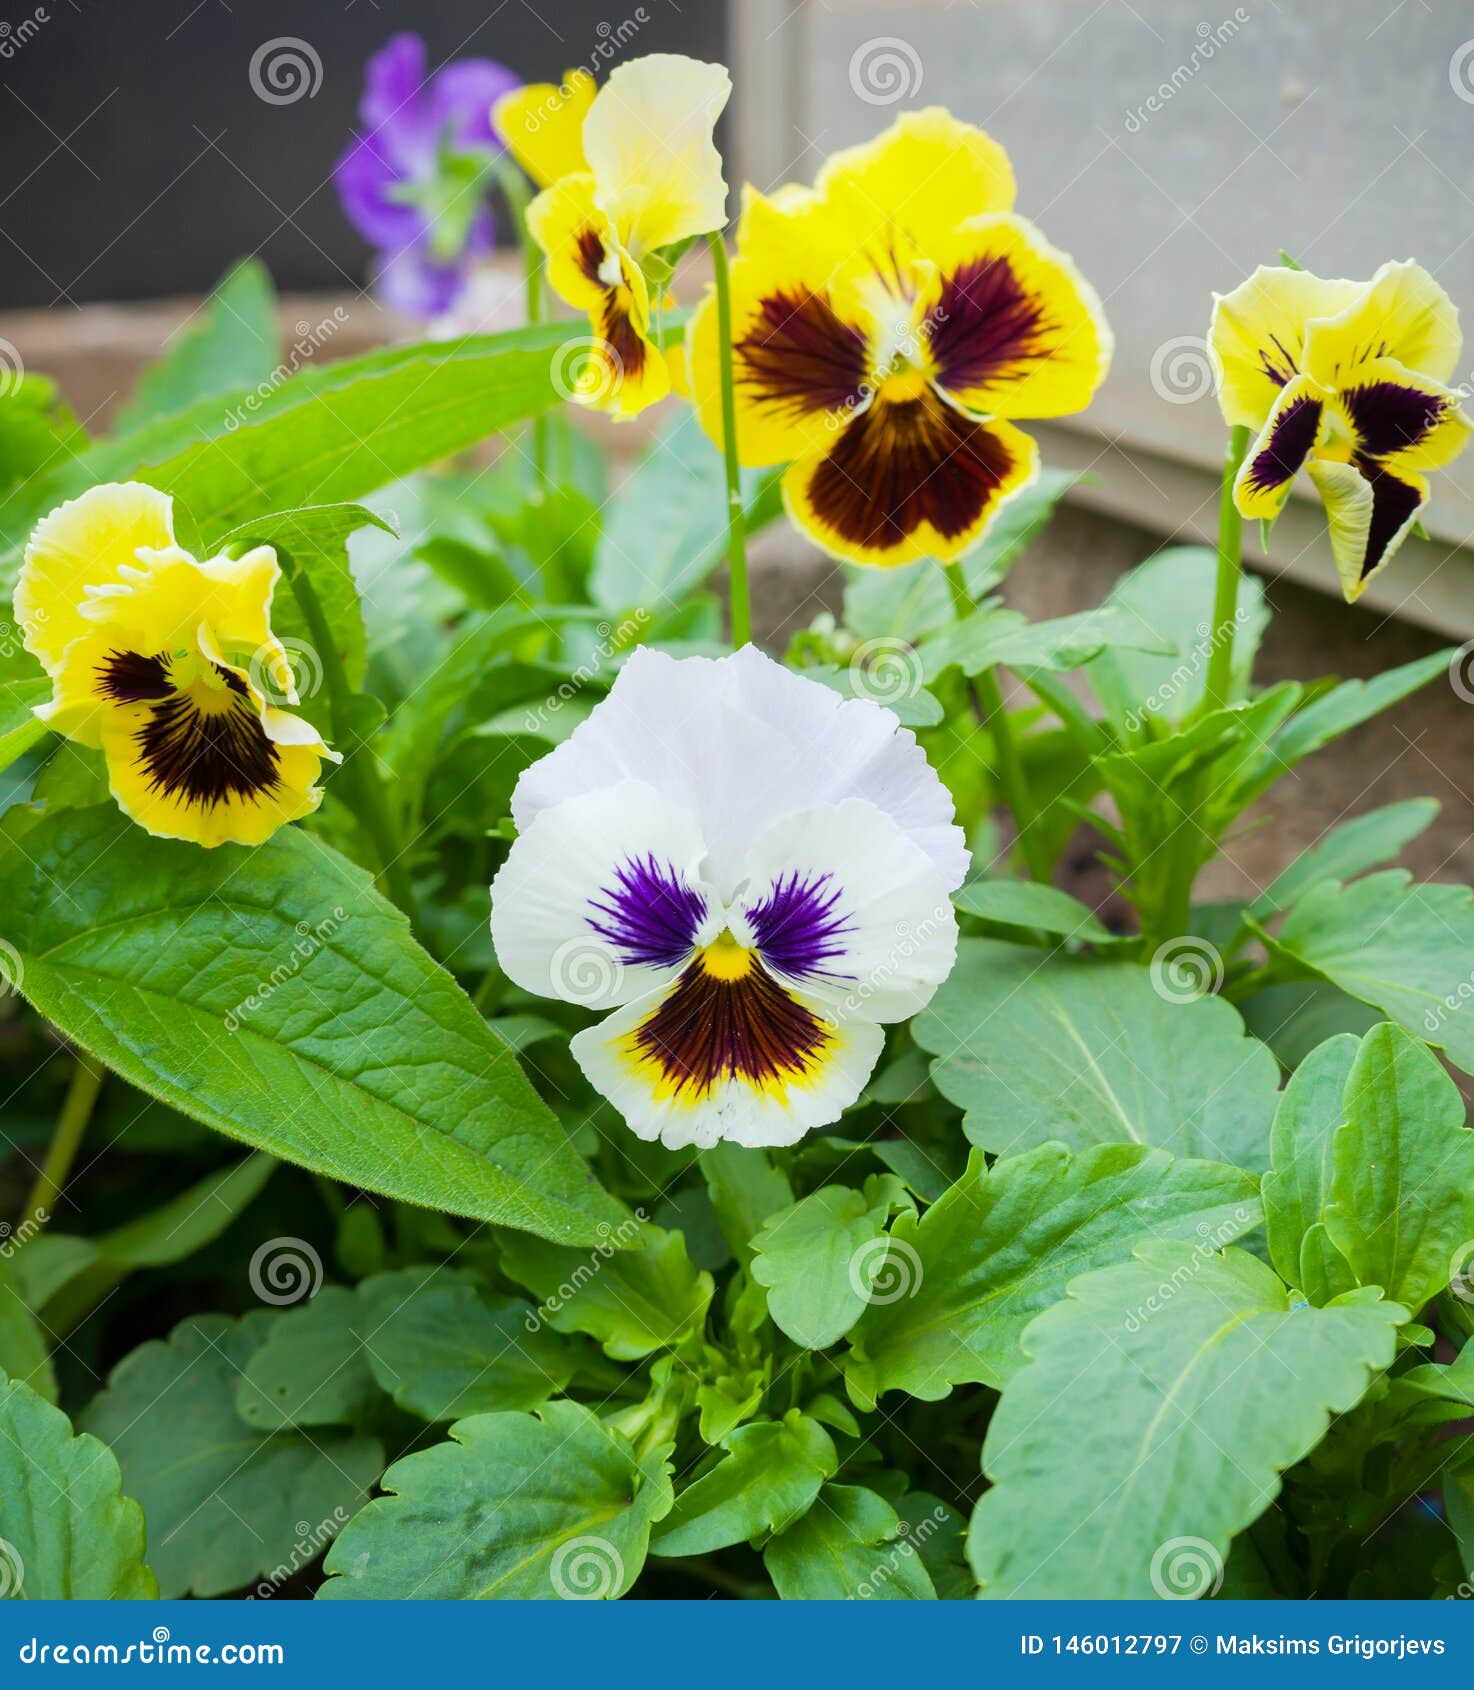 Beautiful Pansy Flowers in Summer Garden Park Stock Image - Image of ...